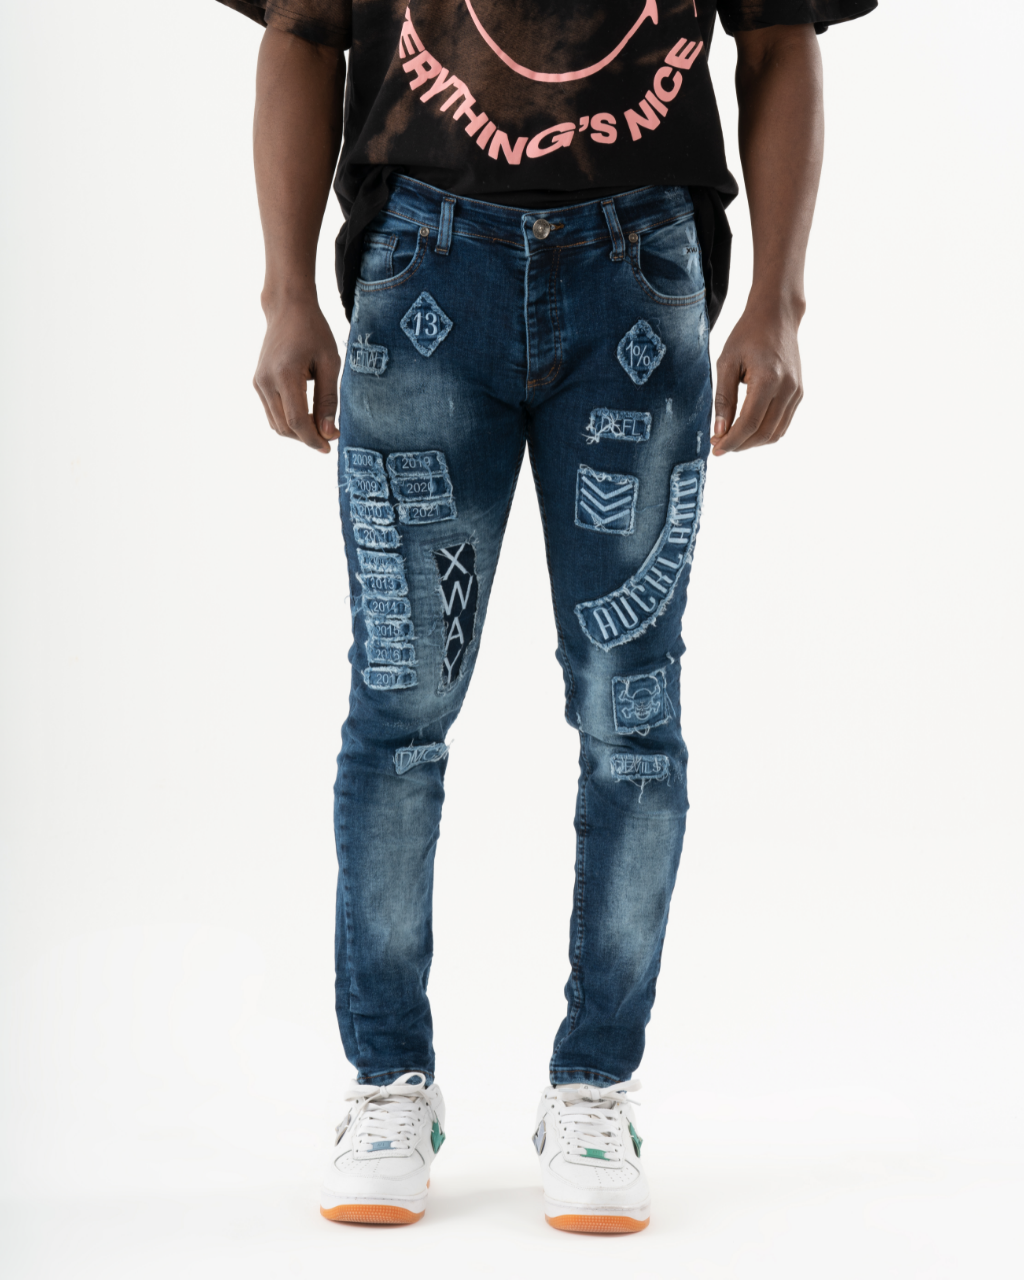 A man in INJUN | BLUE skinny fit jeans and t-shirt.